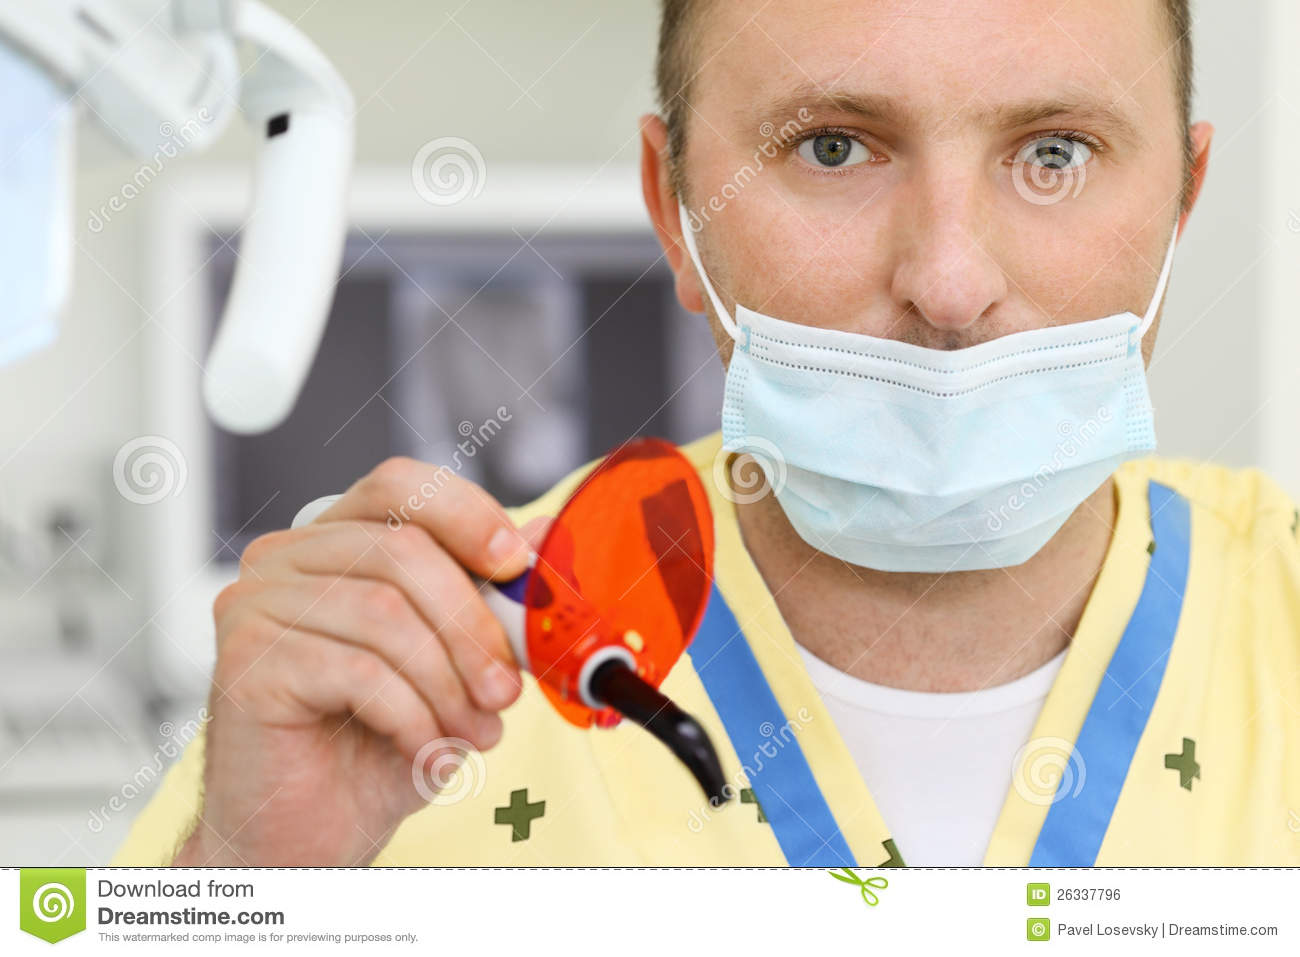 Dentist In Mask With Ultraviolet Curing Light Tool Royalty Free Stock